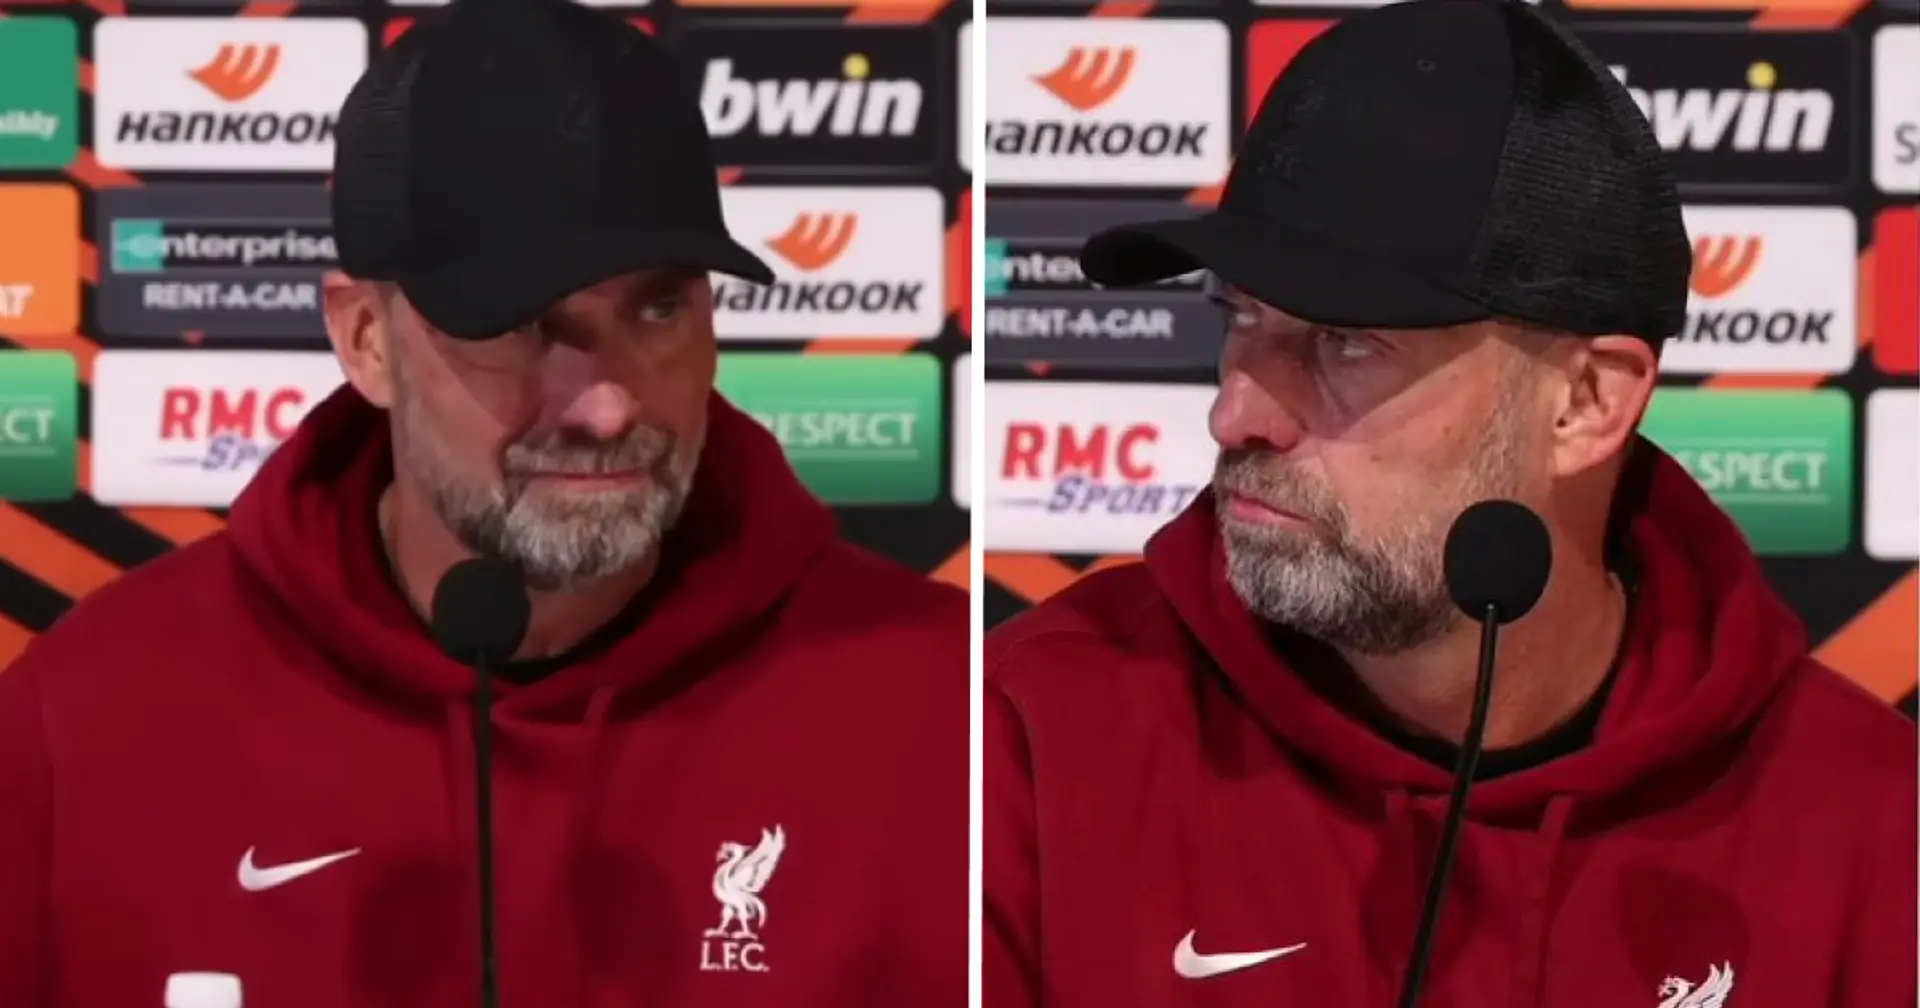 'Whose idea was this?': Klopp left fuming over what happened in press conference at Toulouse